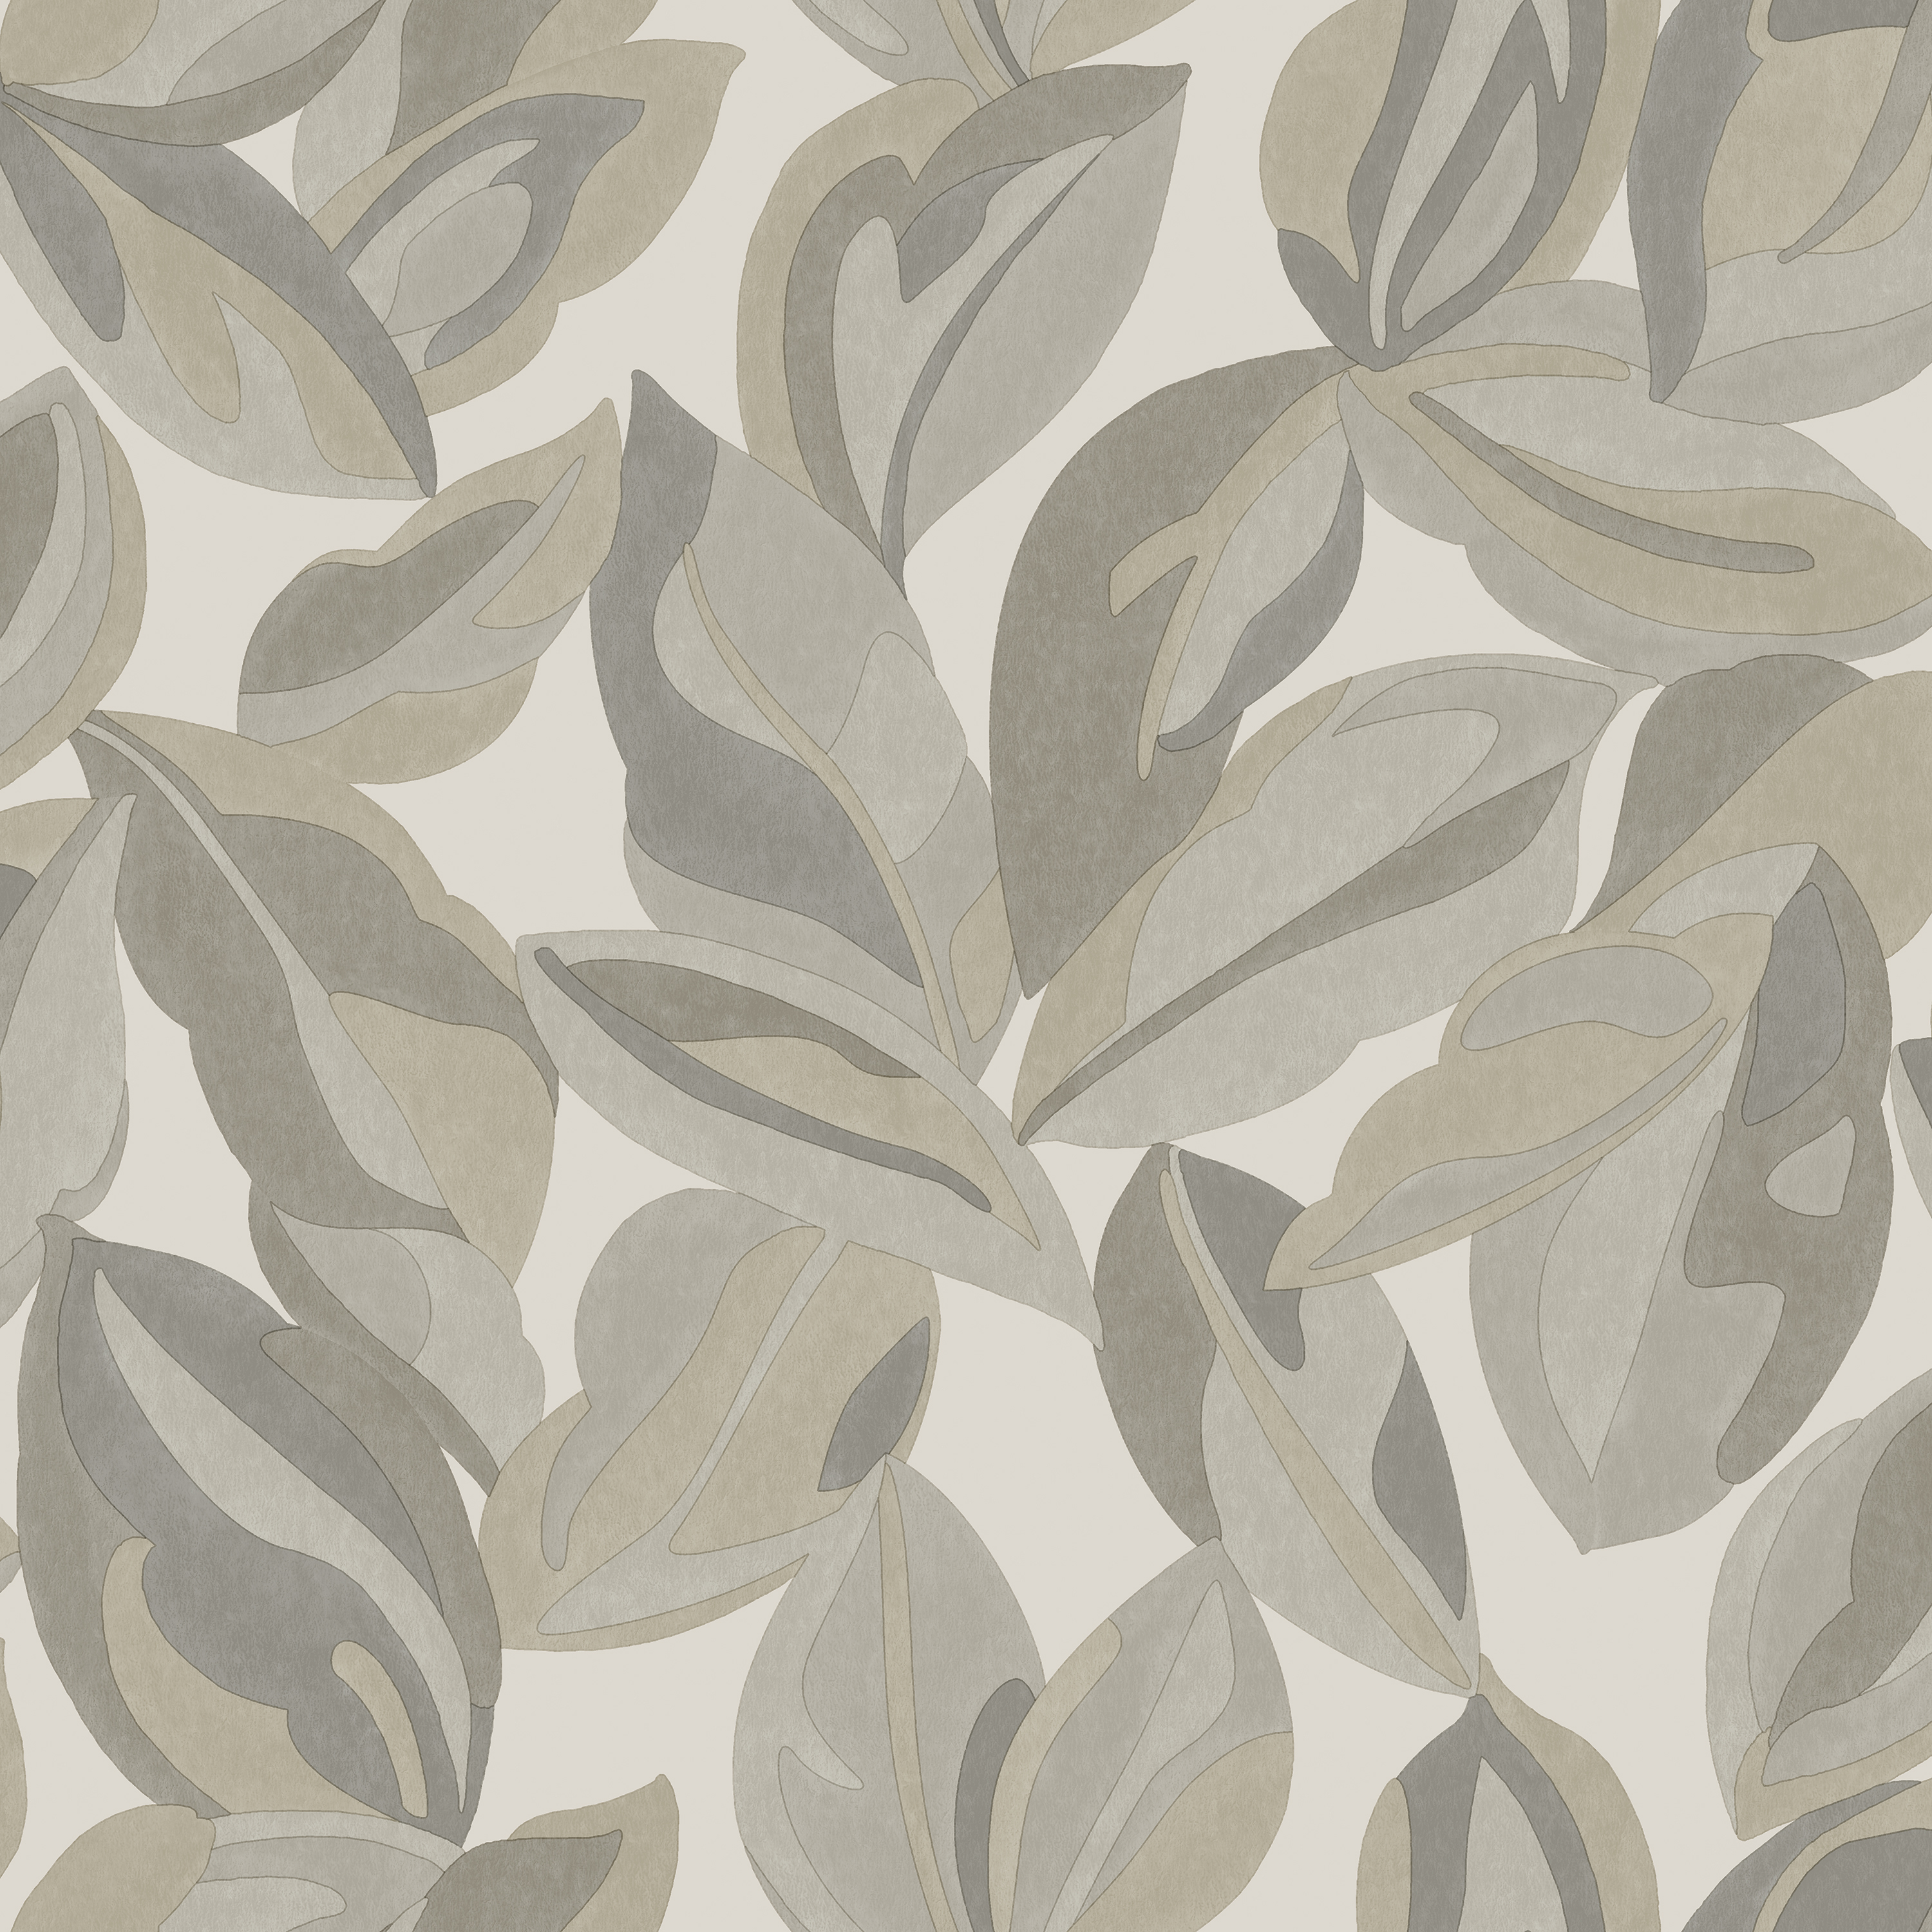 Image of Holden Decor Abstract Leaf Beige Wallpaper - 10.05m x 53cm